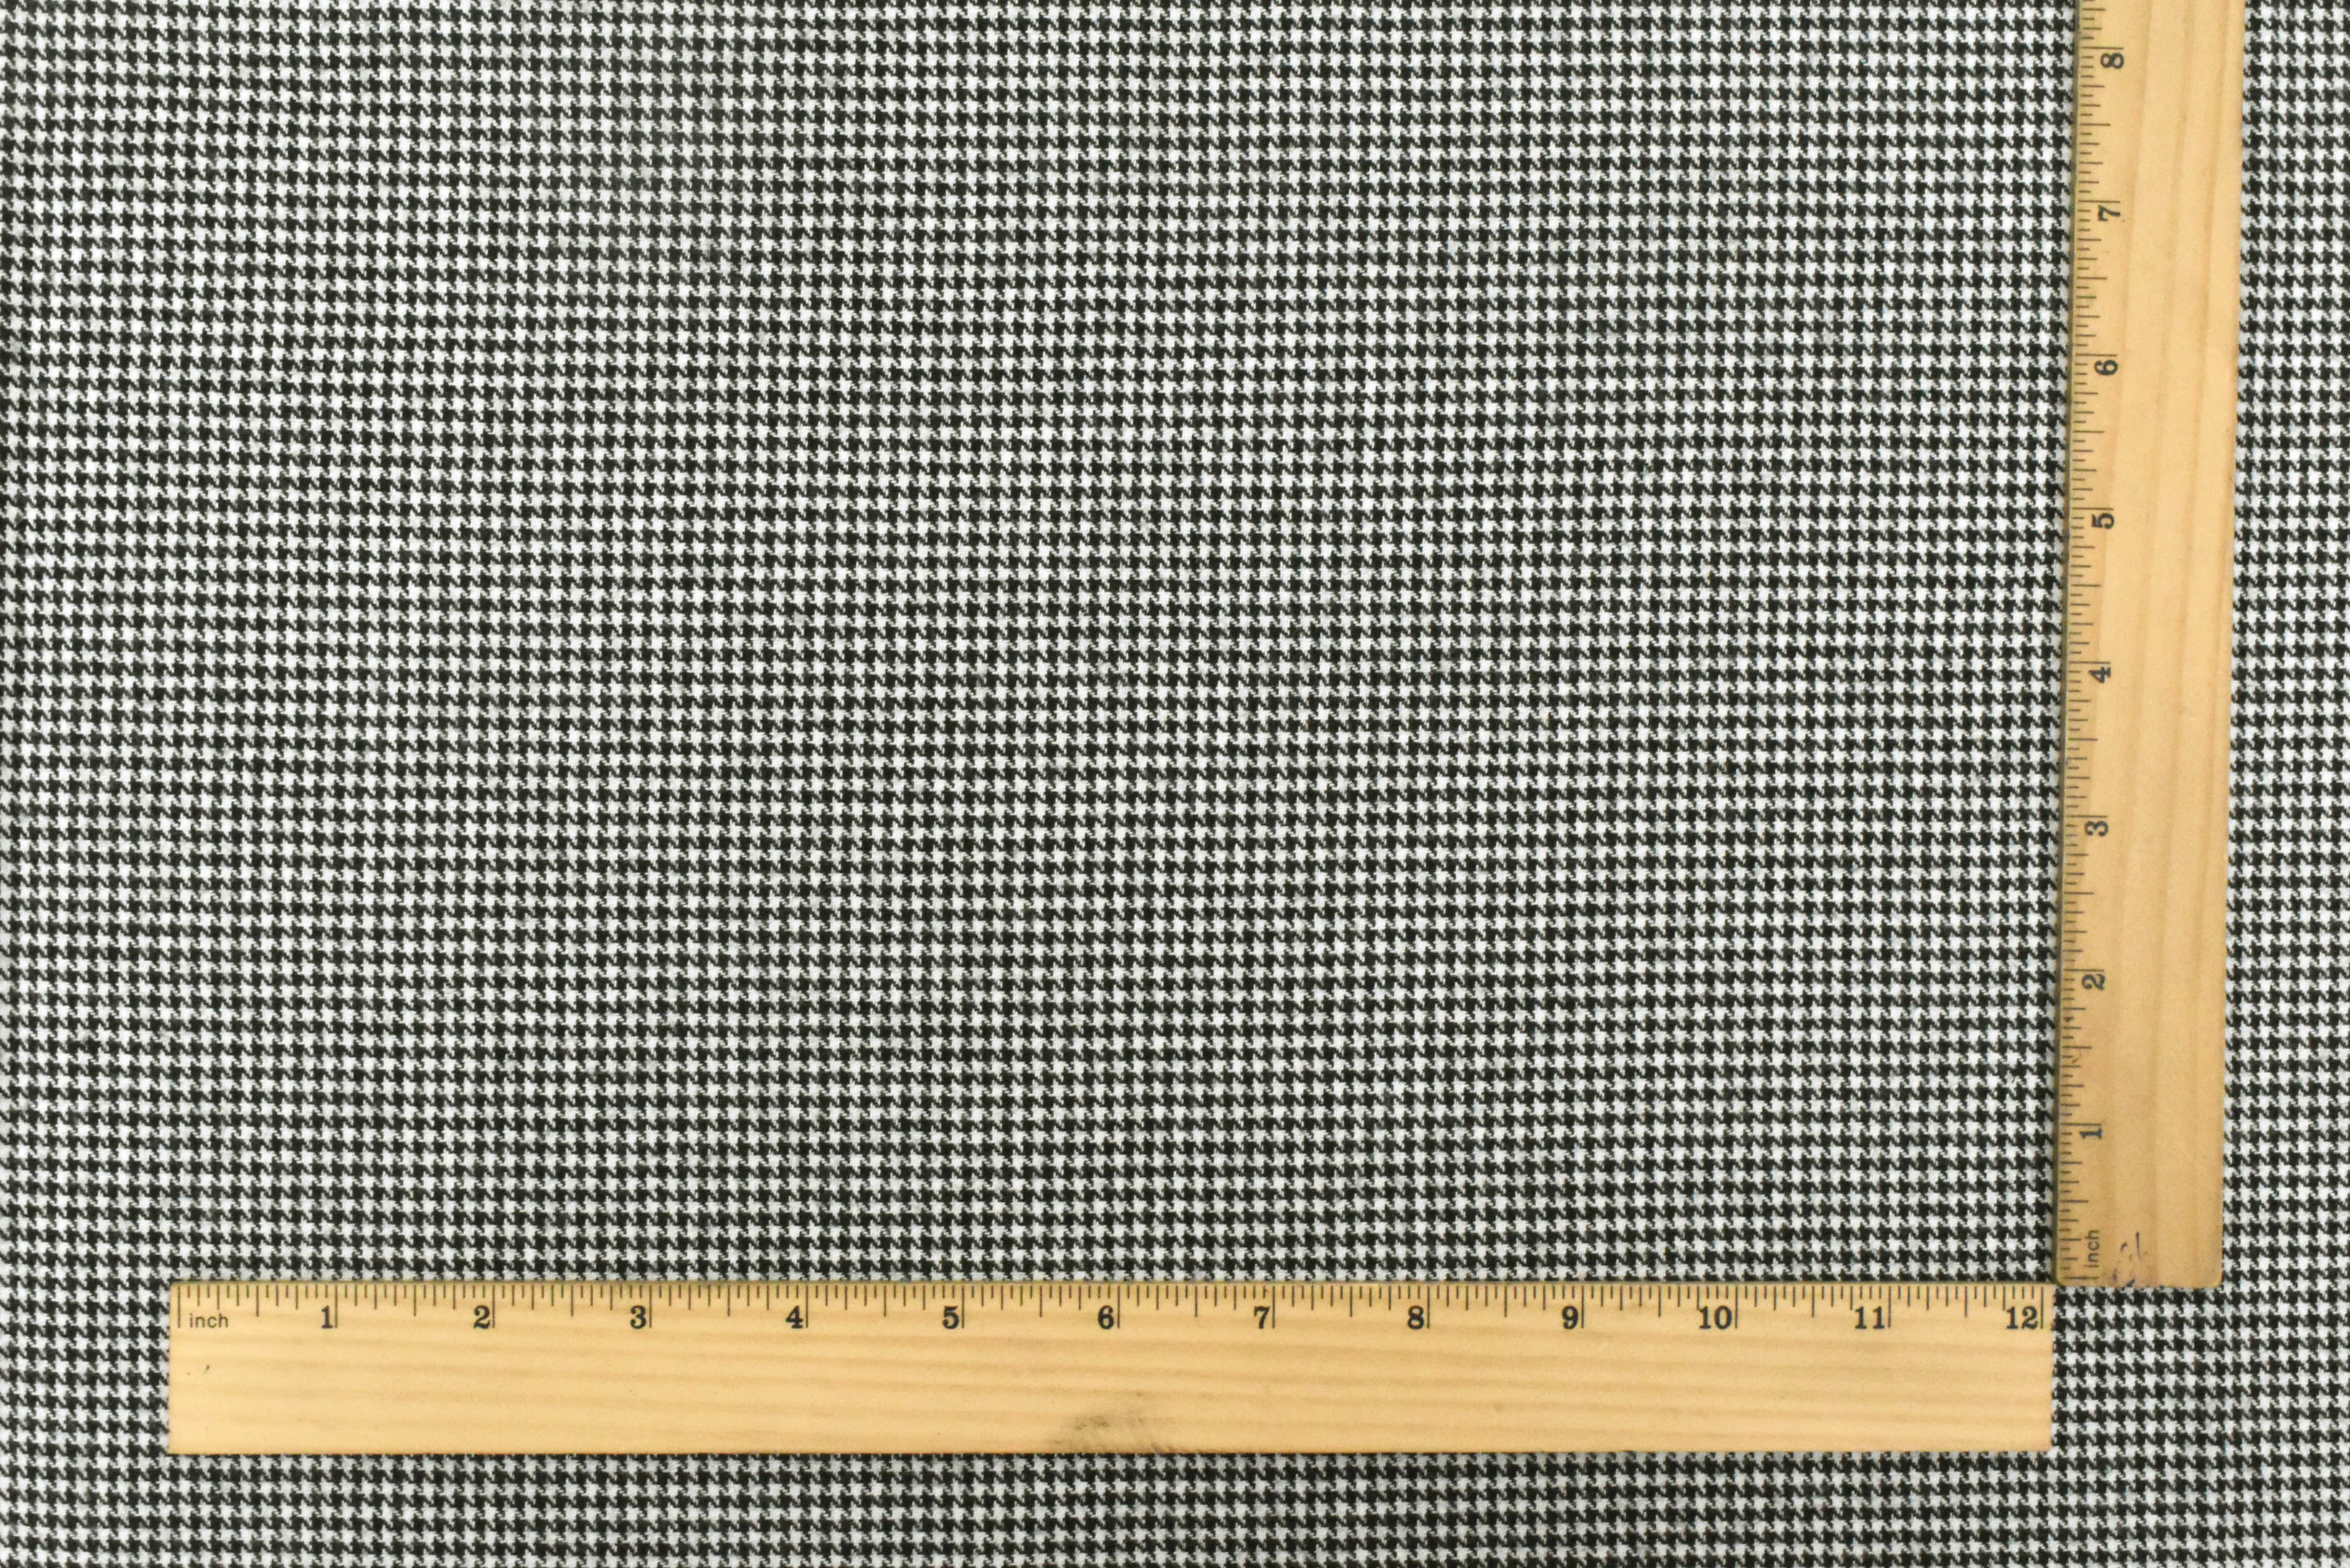 Small Houndstooth Black / White Fabric